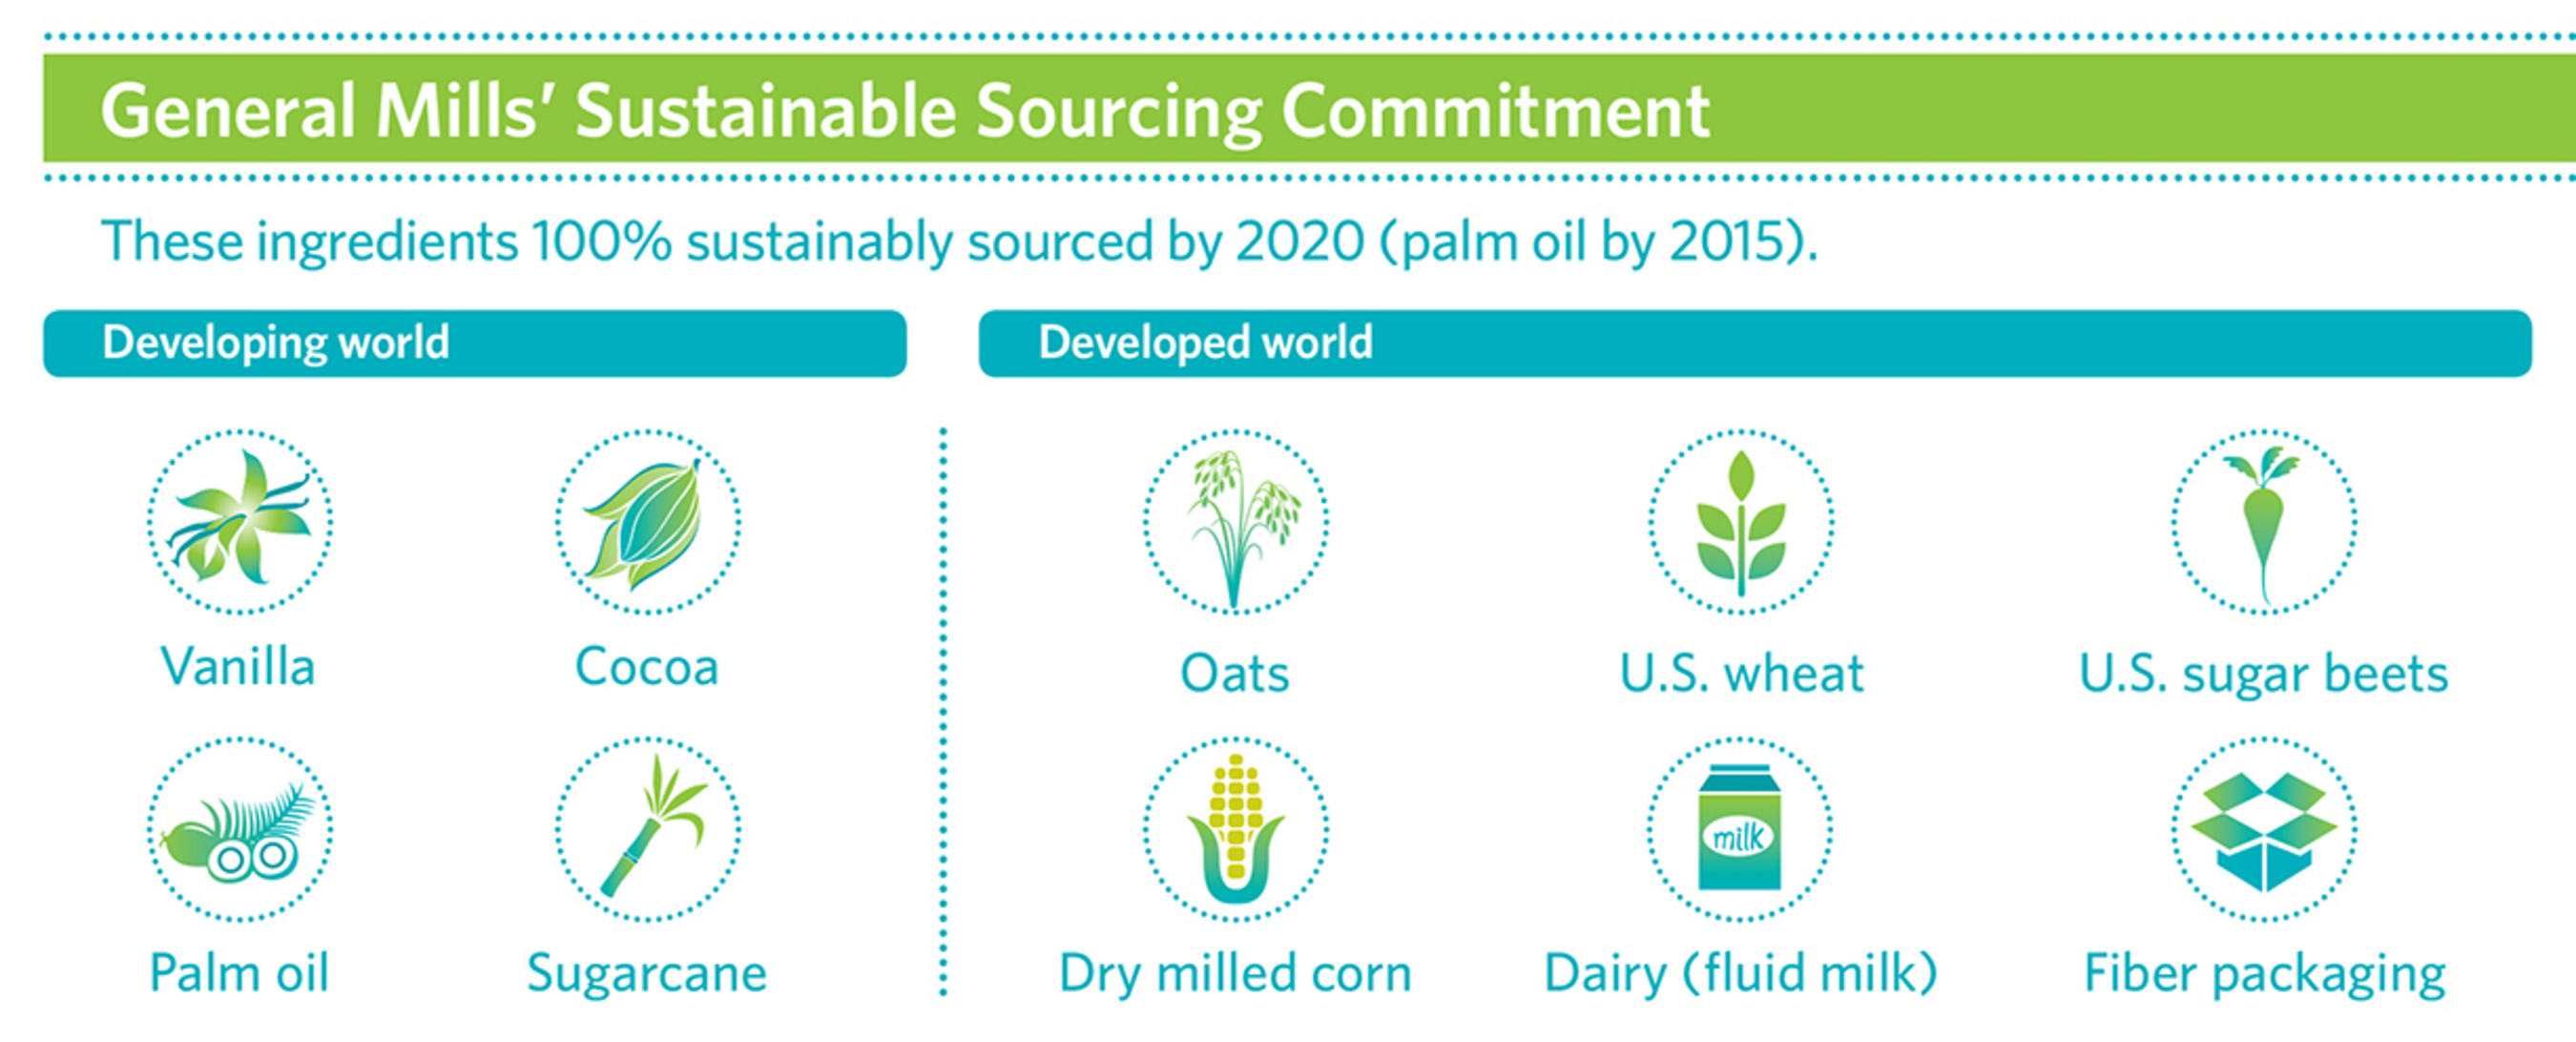 General Mills has committed to sustainably source 100 percent of its 10 priority ingredients by 2020. (PRNewsFoto/General Mills)